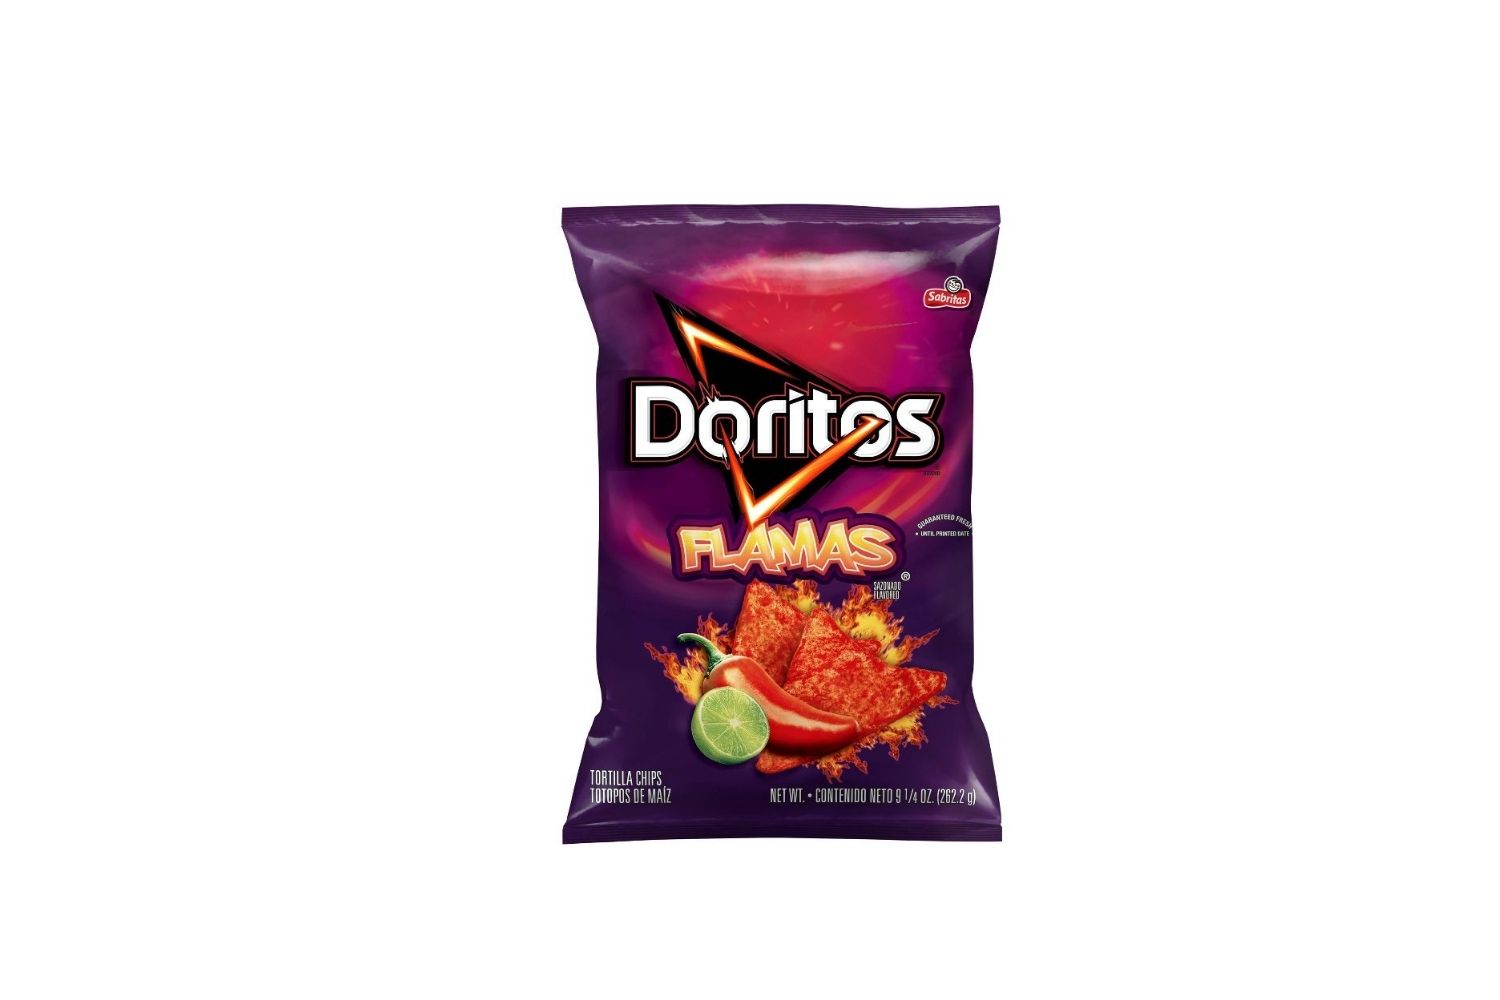 19-enigmatic-facts-about-doritos-flamas